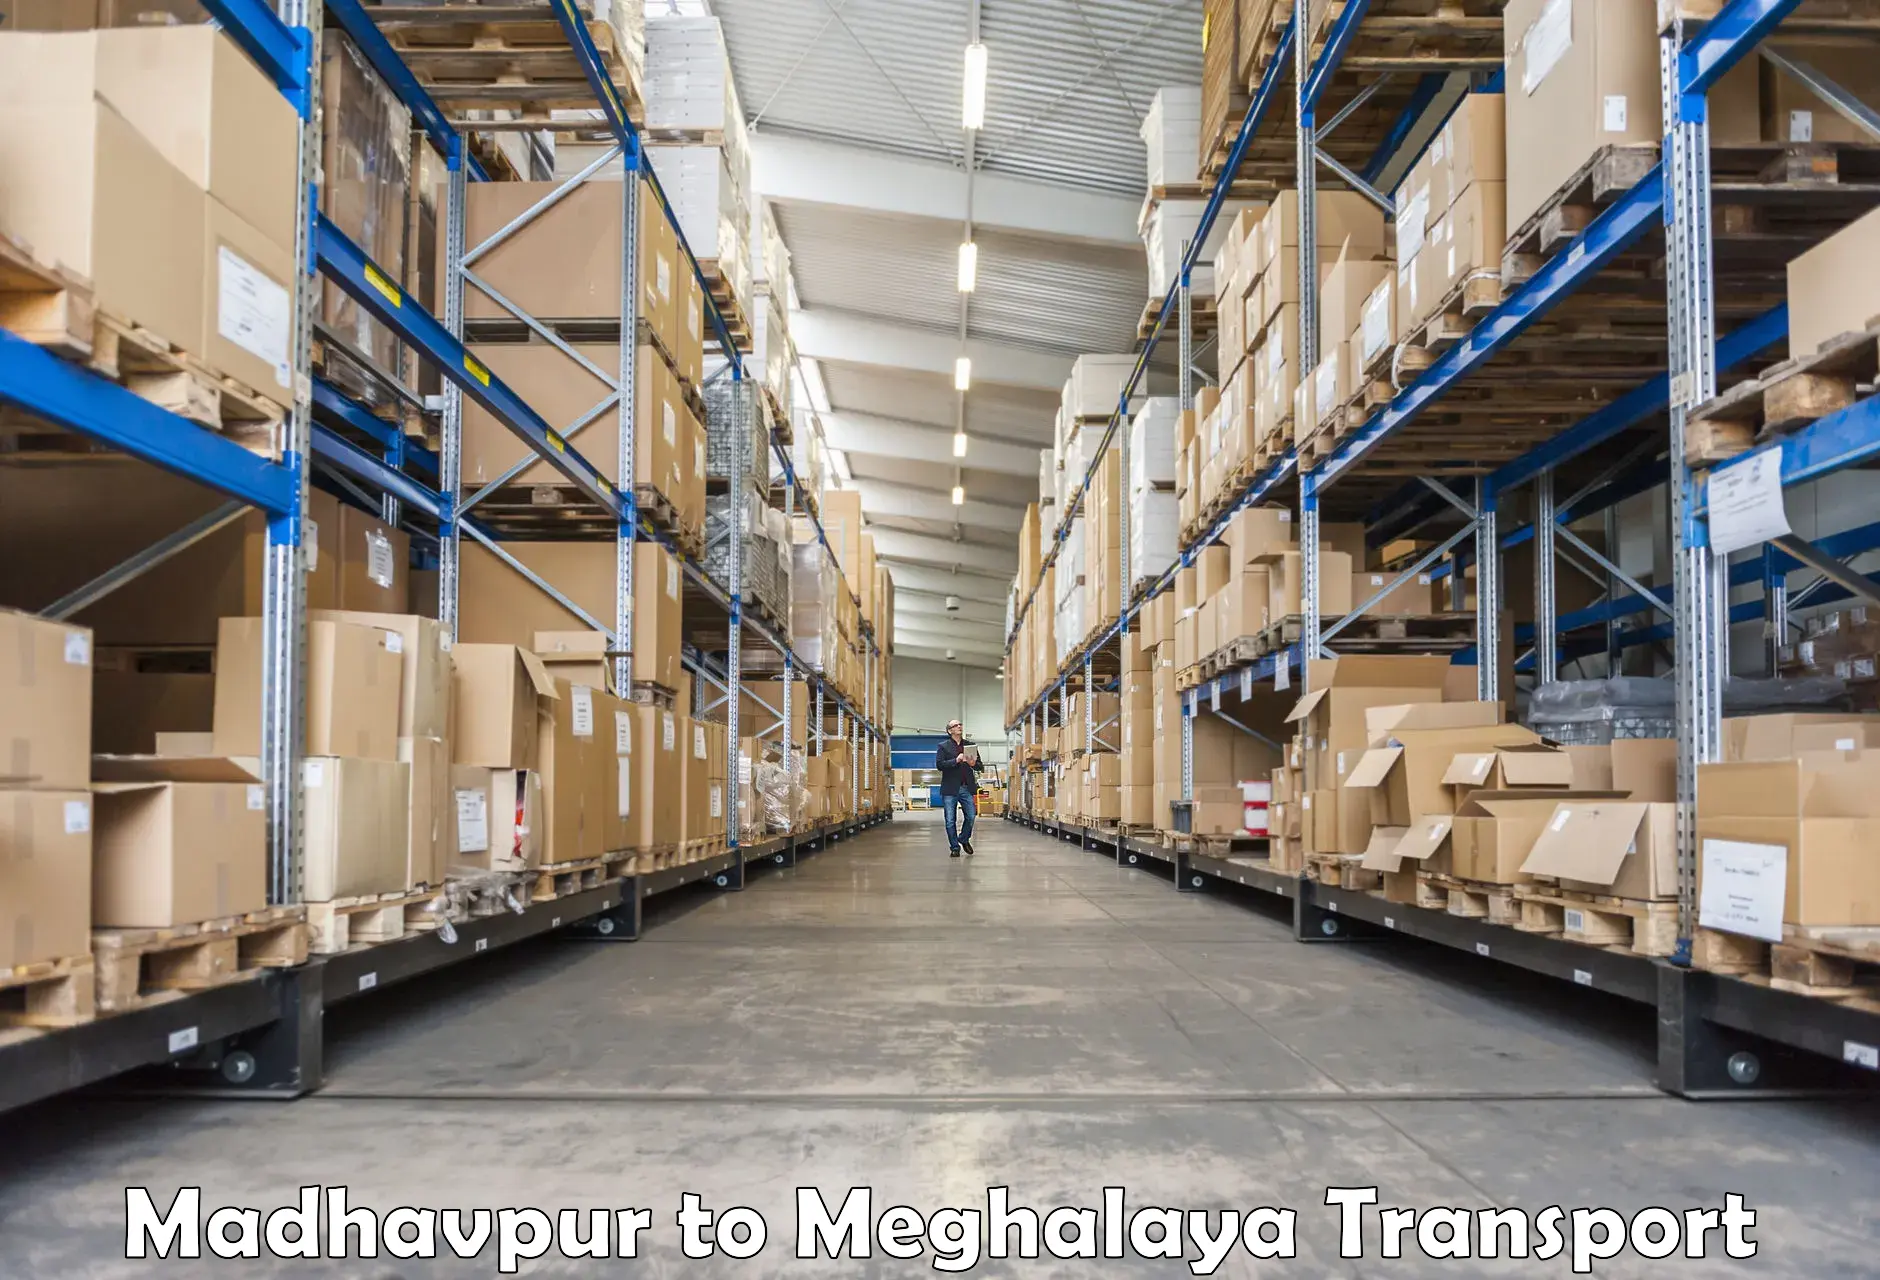 Road transport services in Madhavpur to Meghalaya